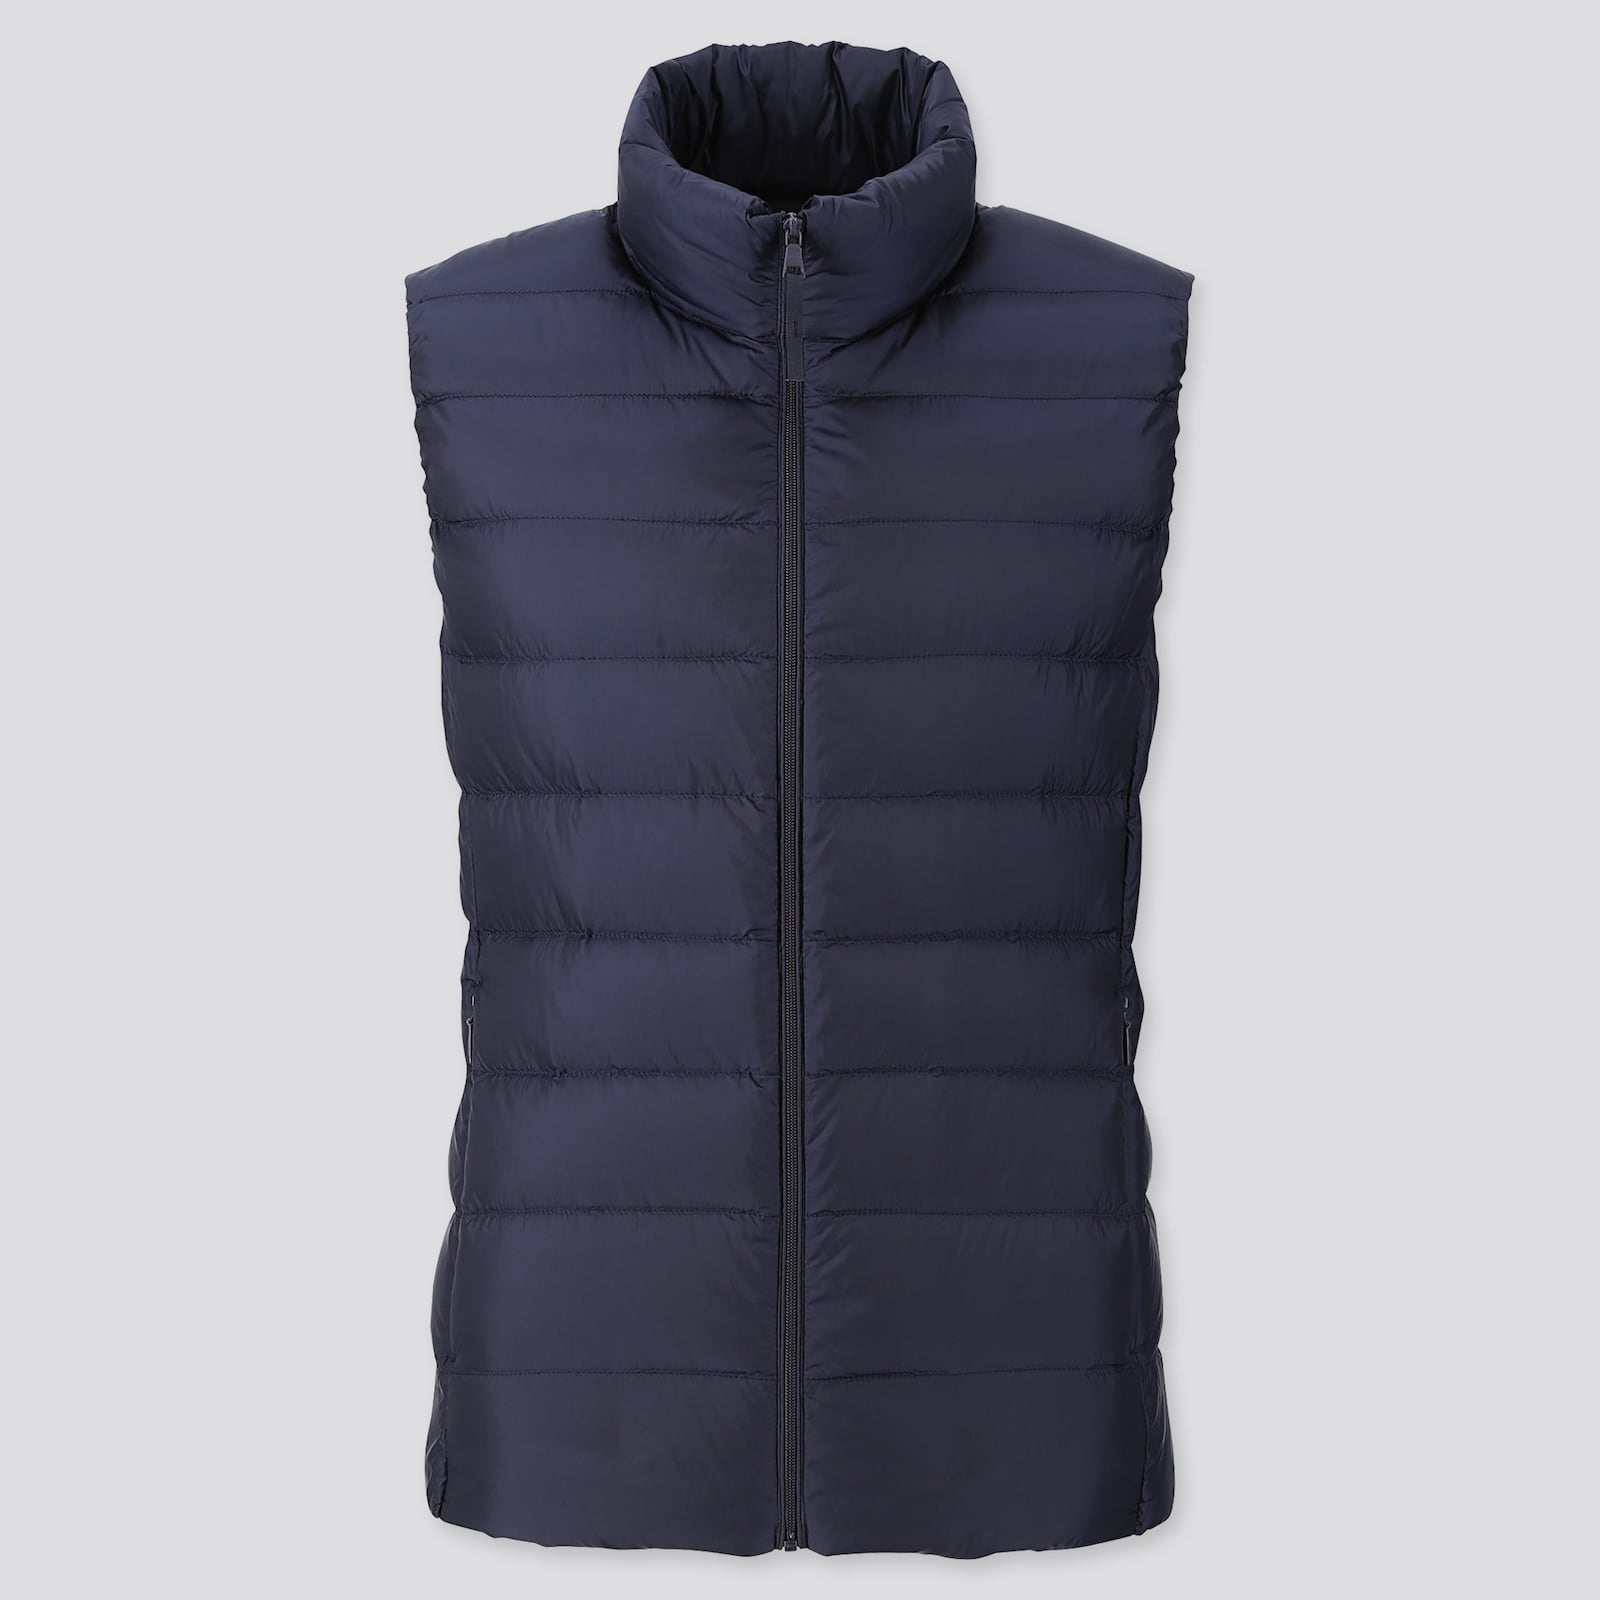 Uniqlo womens vest sheffield financial make a payment